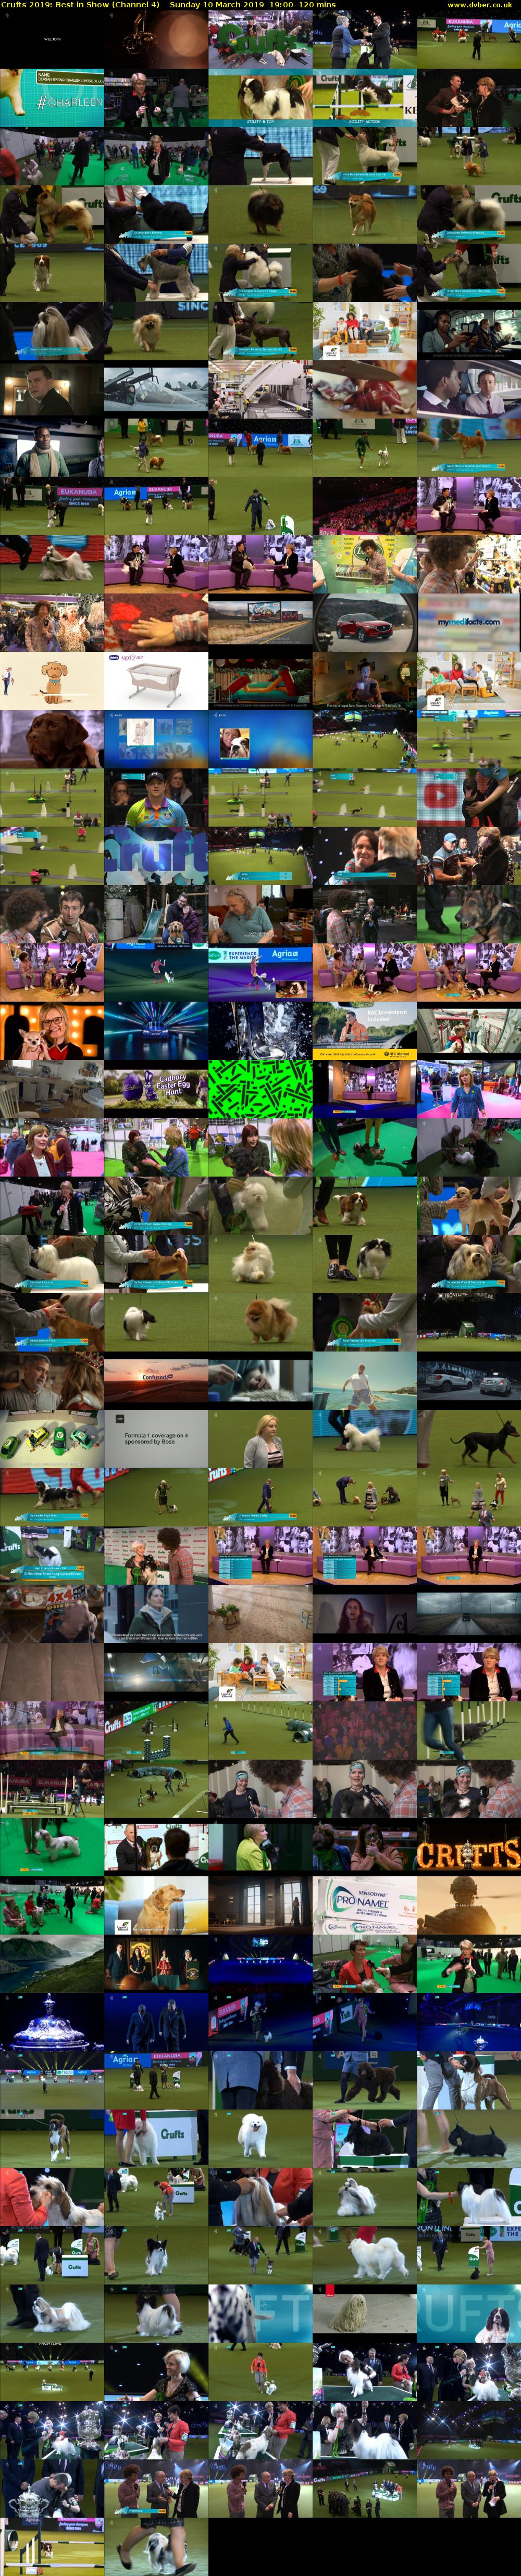 Crufts 2019: Best in Show (Channel 4) Sunday 10 March 2019 19:00 - 21:00